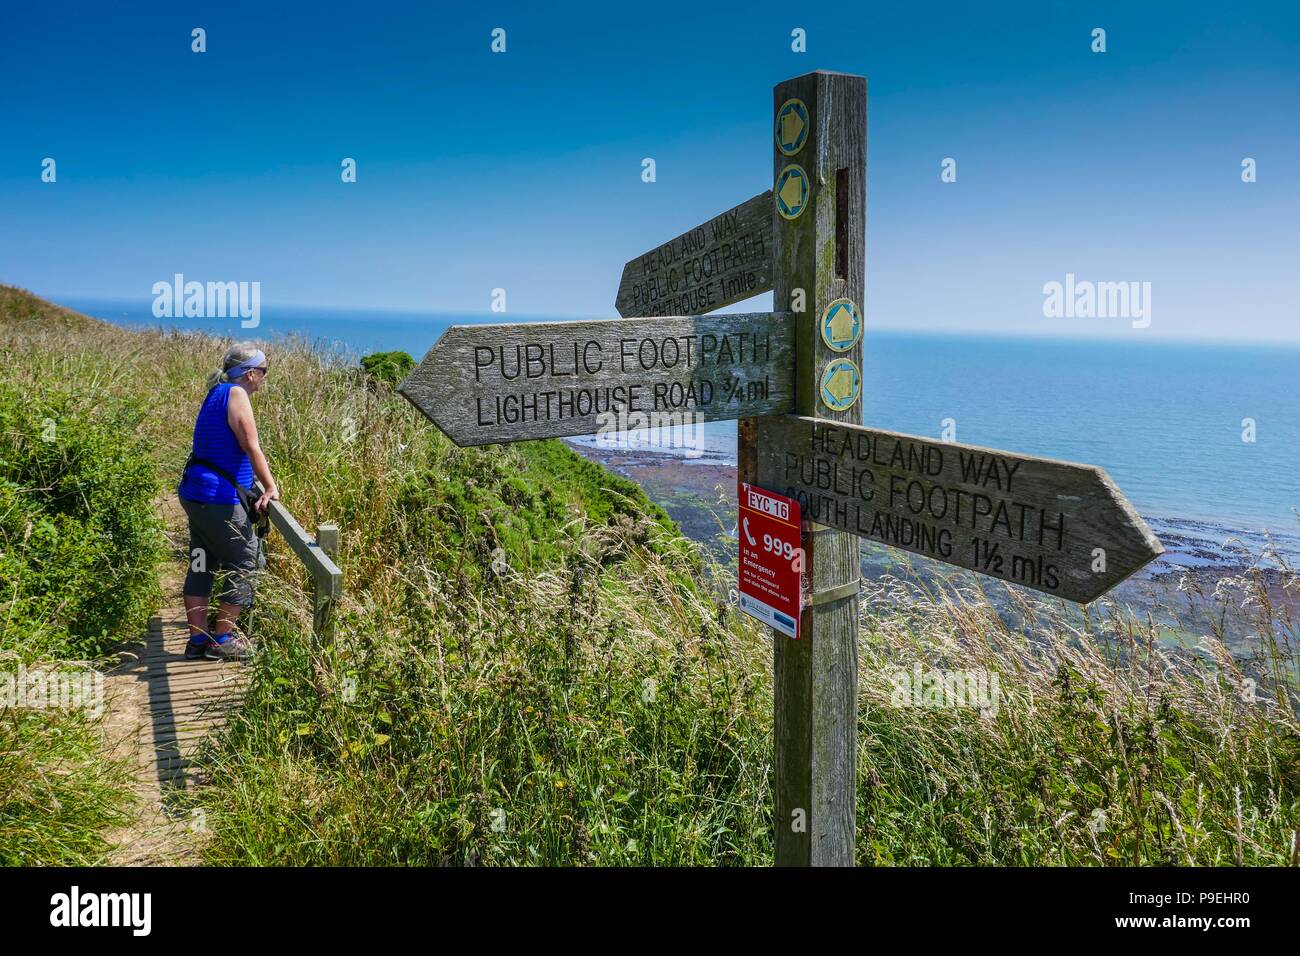 Walker with footpath sign and Summer weather at Flamborough Head, Easy Yorkshire Stock Photo